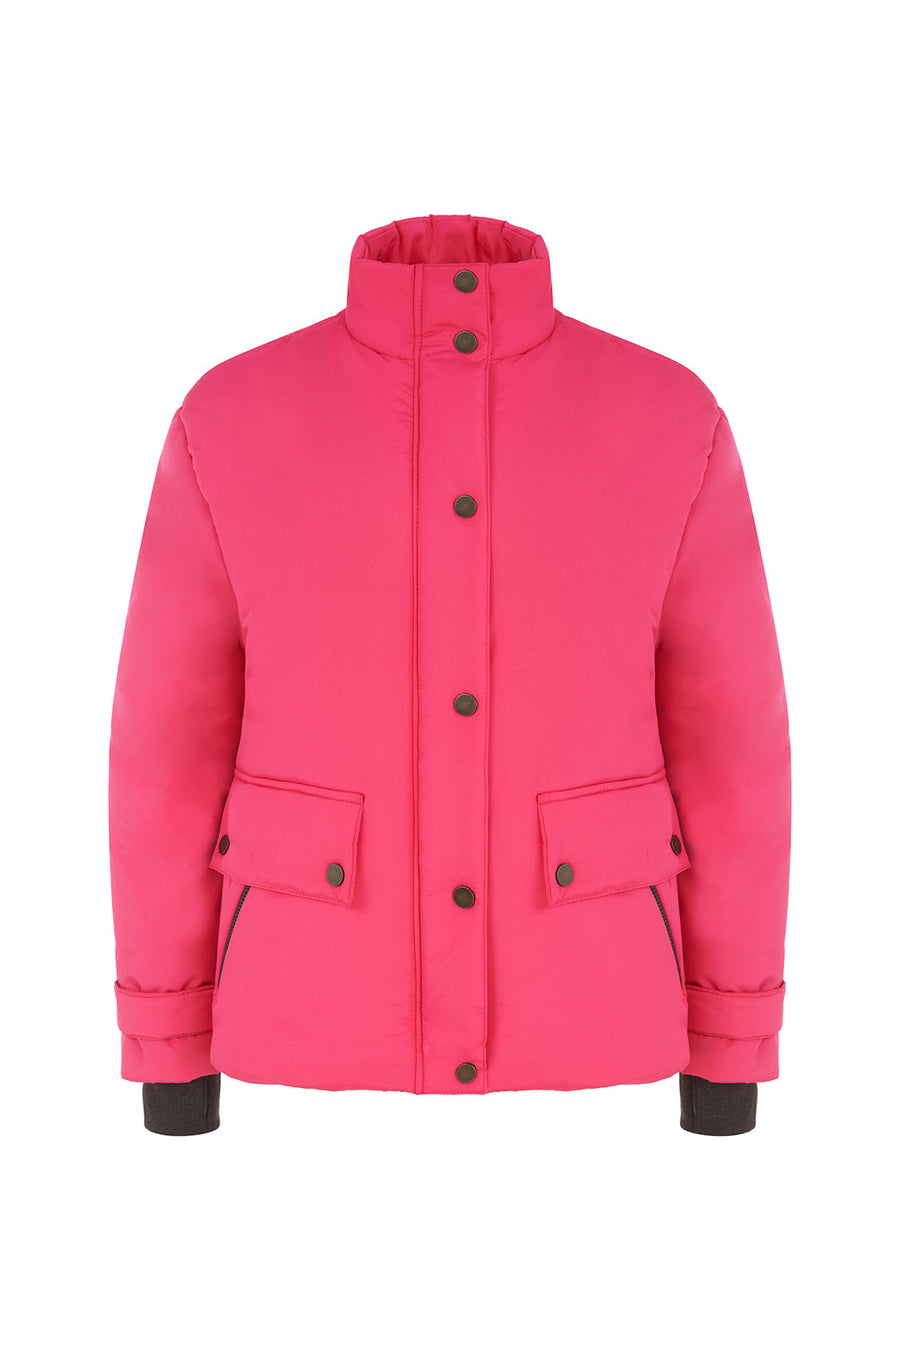 JUDE - Pink padded jacket with contrast lining